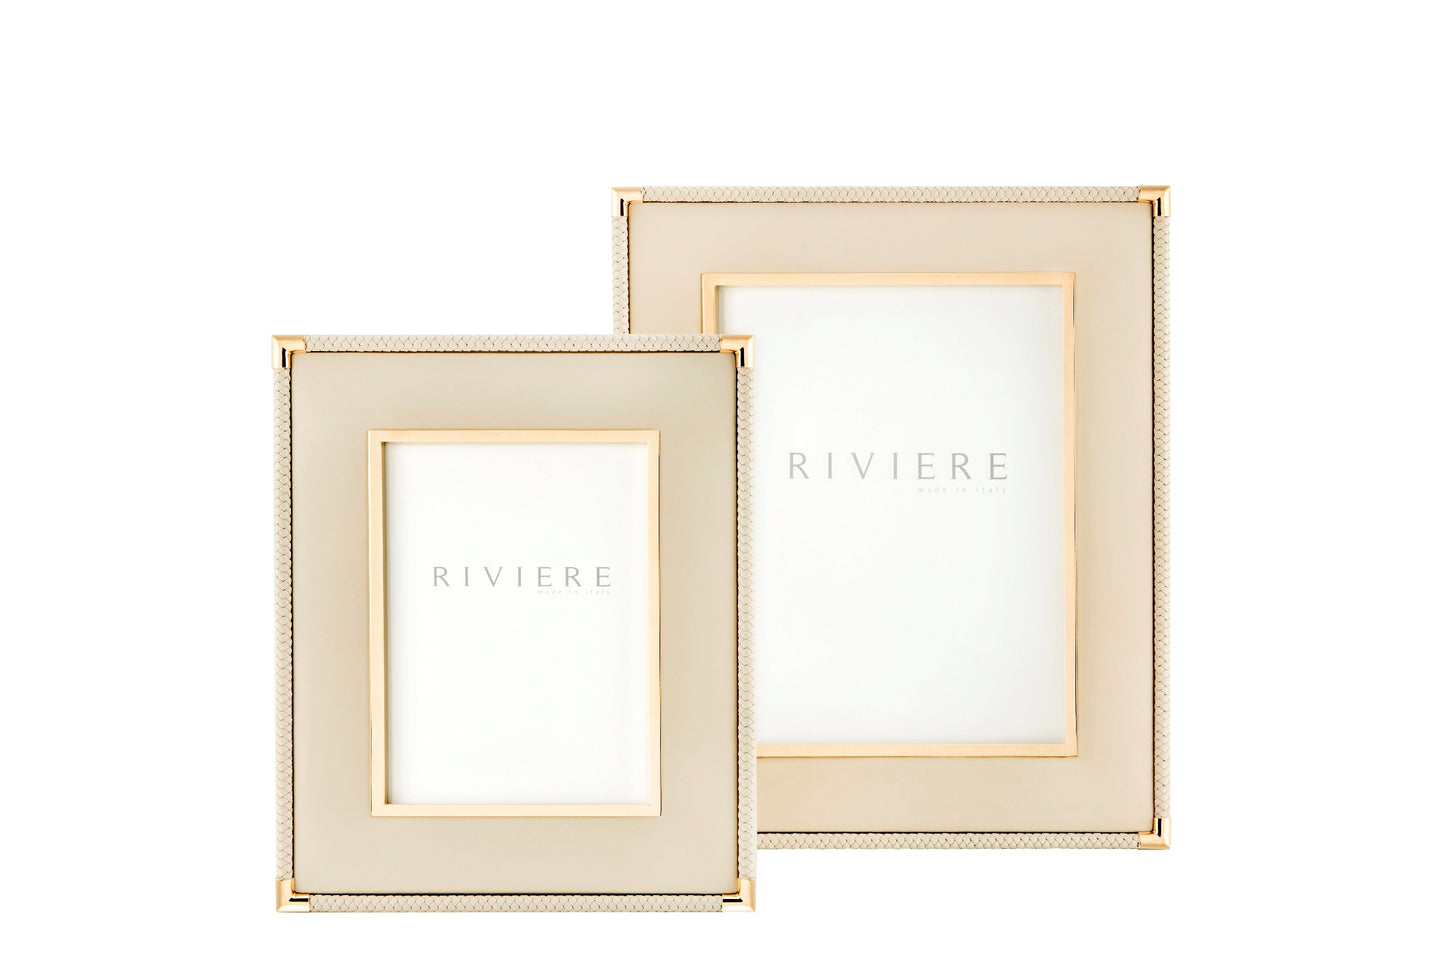 Riviere Thea #2 Leather Picture Frame With Metal Trim | Elegant Leather Frame Design | Inner Chrome or Gold Metal Trim | Outer Braided Trim for Added Sophistication | Perfect for Showcasing Your Precious Memories | Available at 2Jour Concierge, #1 luxury high-end gift & lifestyle shop